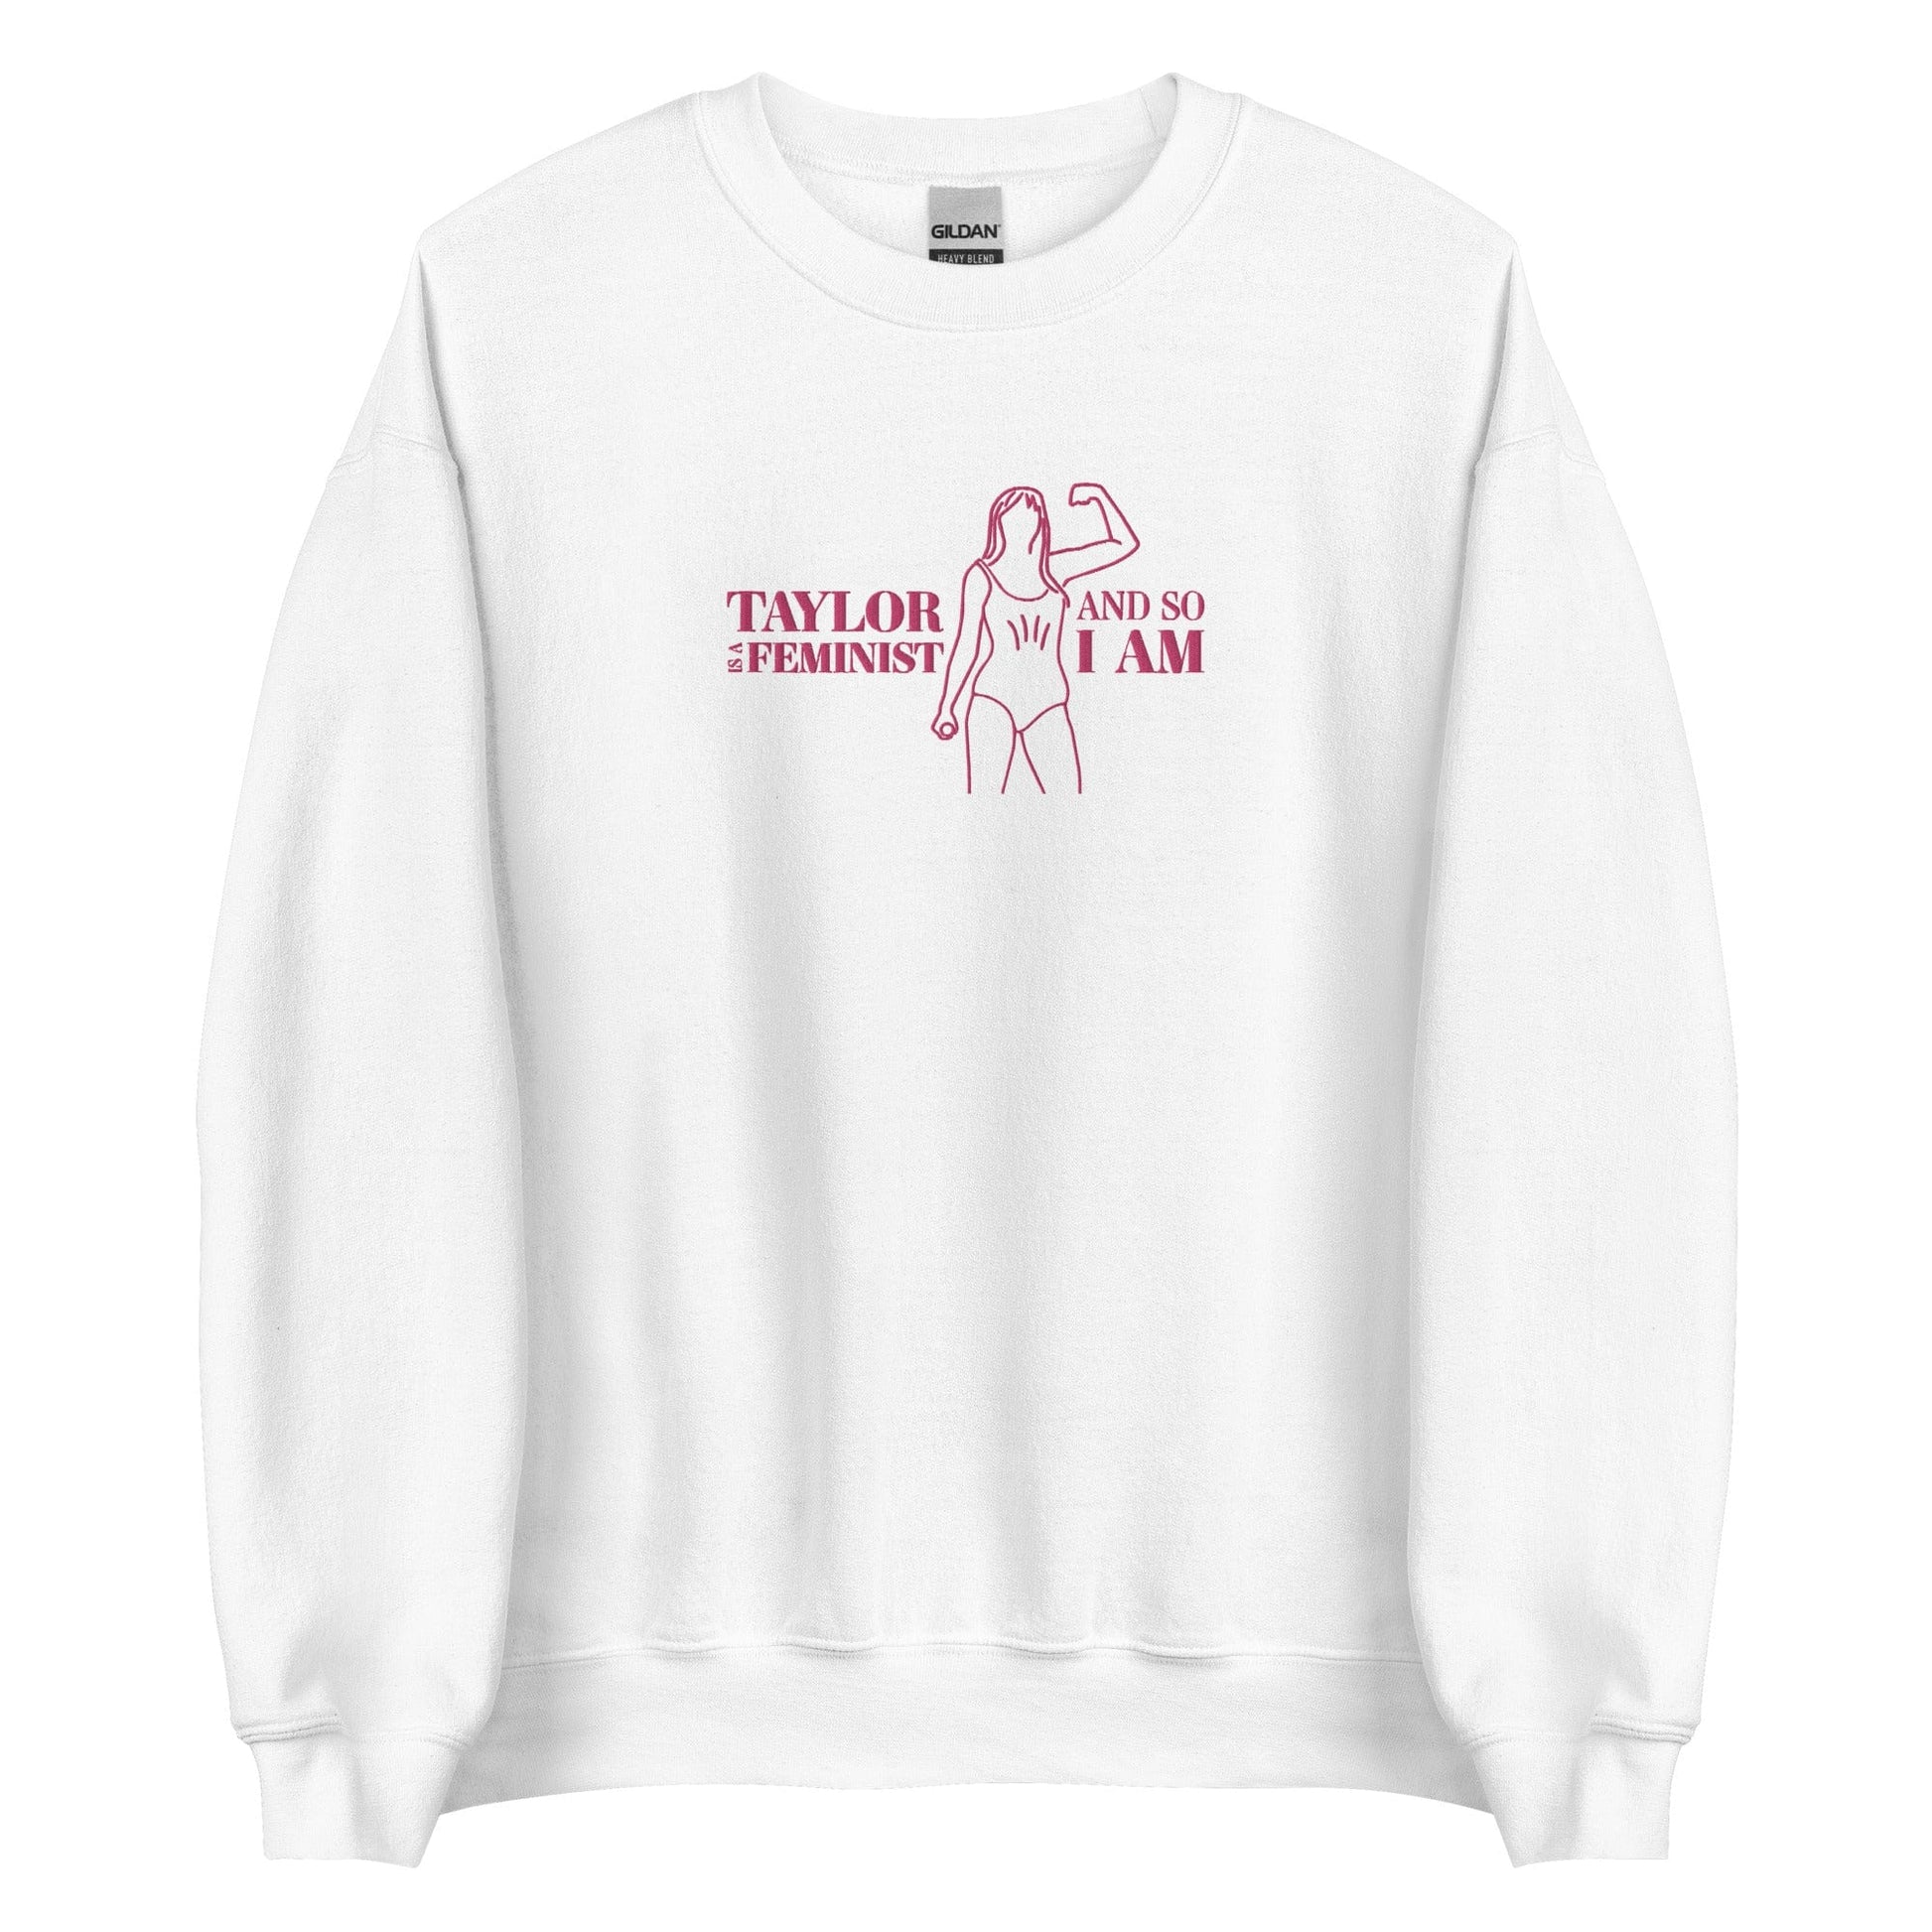 Taylor-embroidery-white-feminist-sweatshirt-front